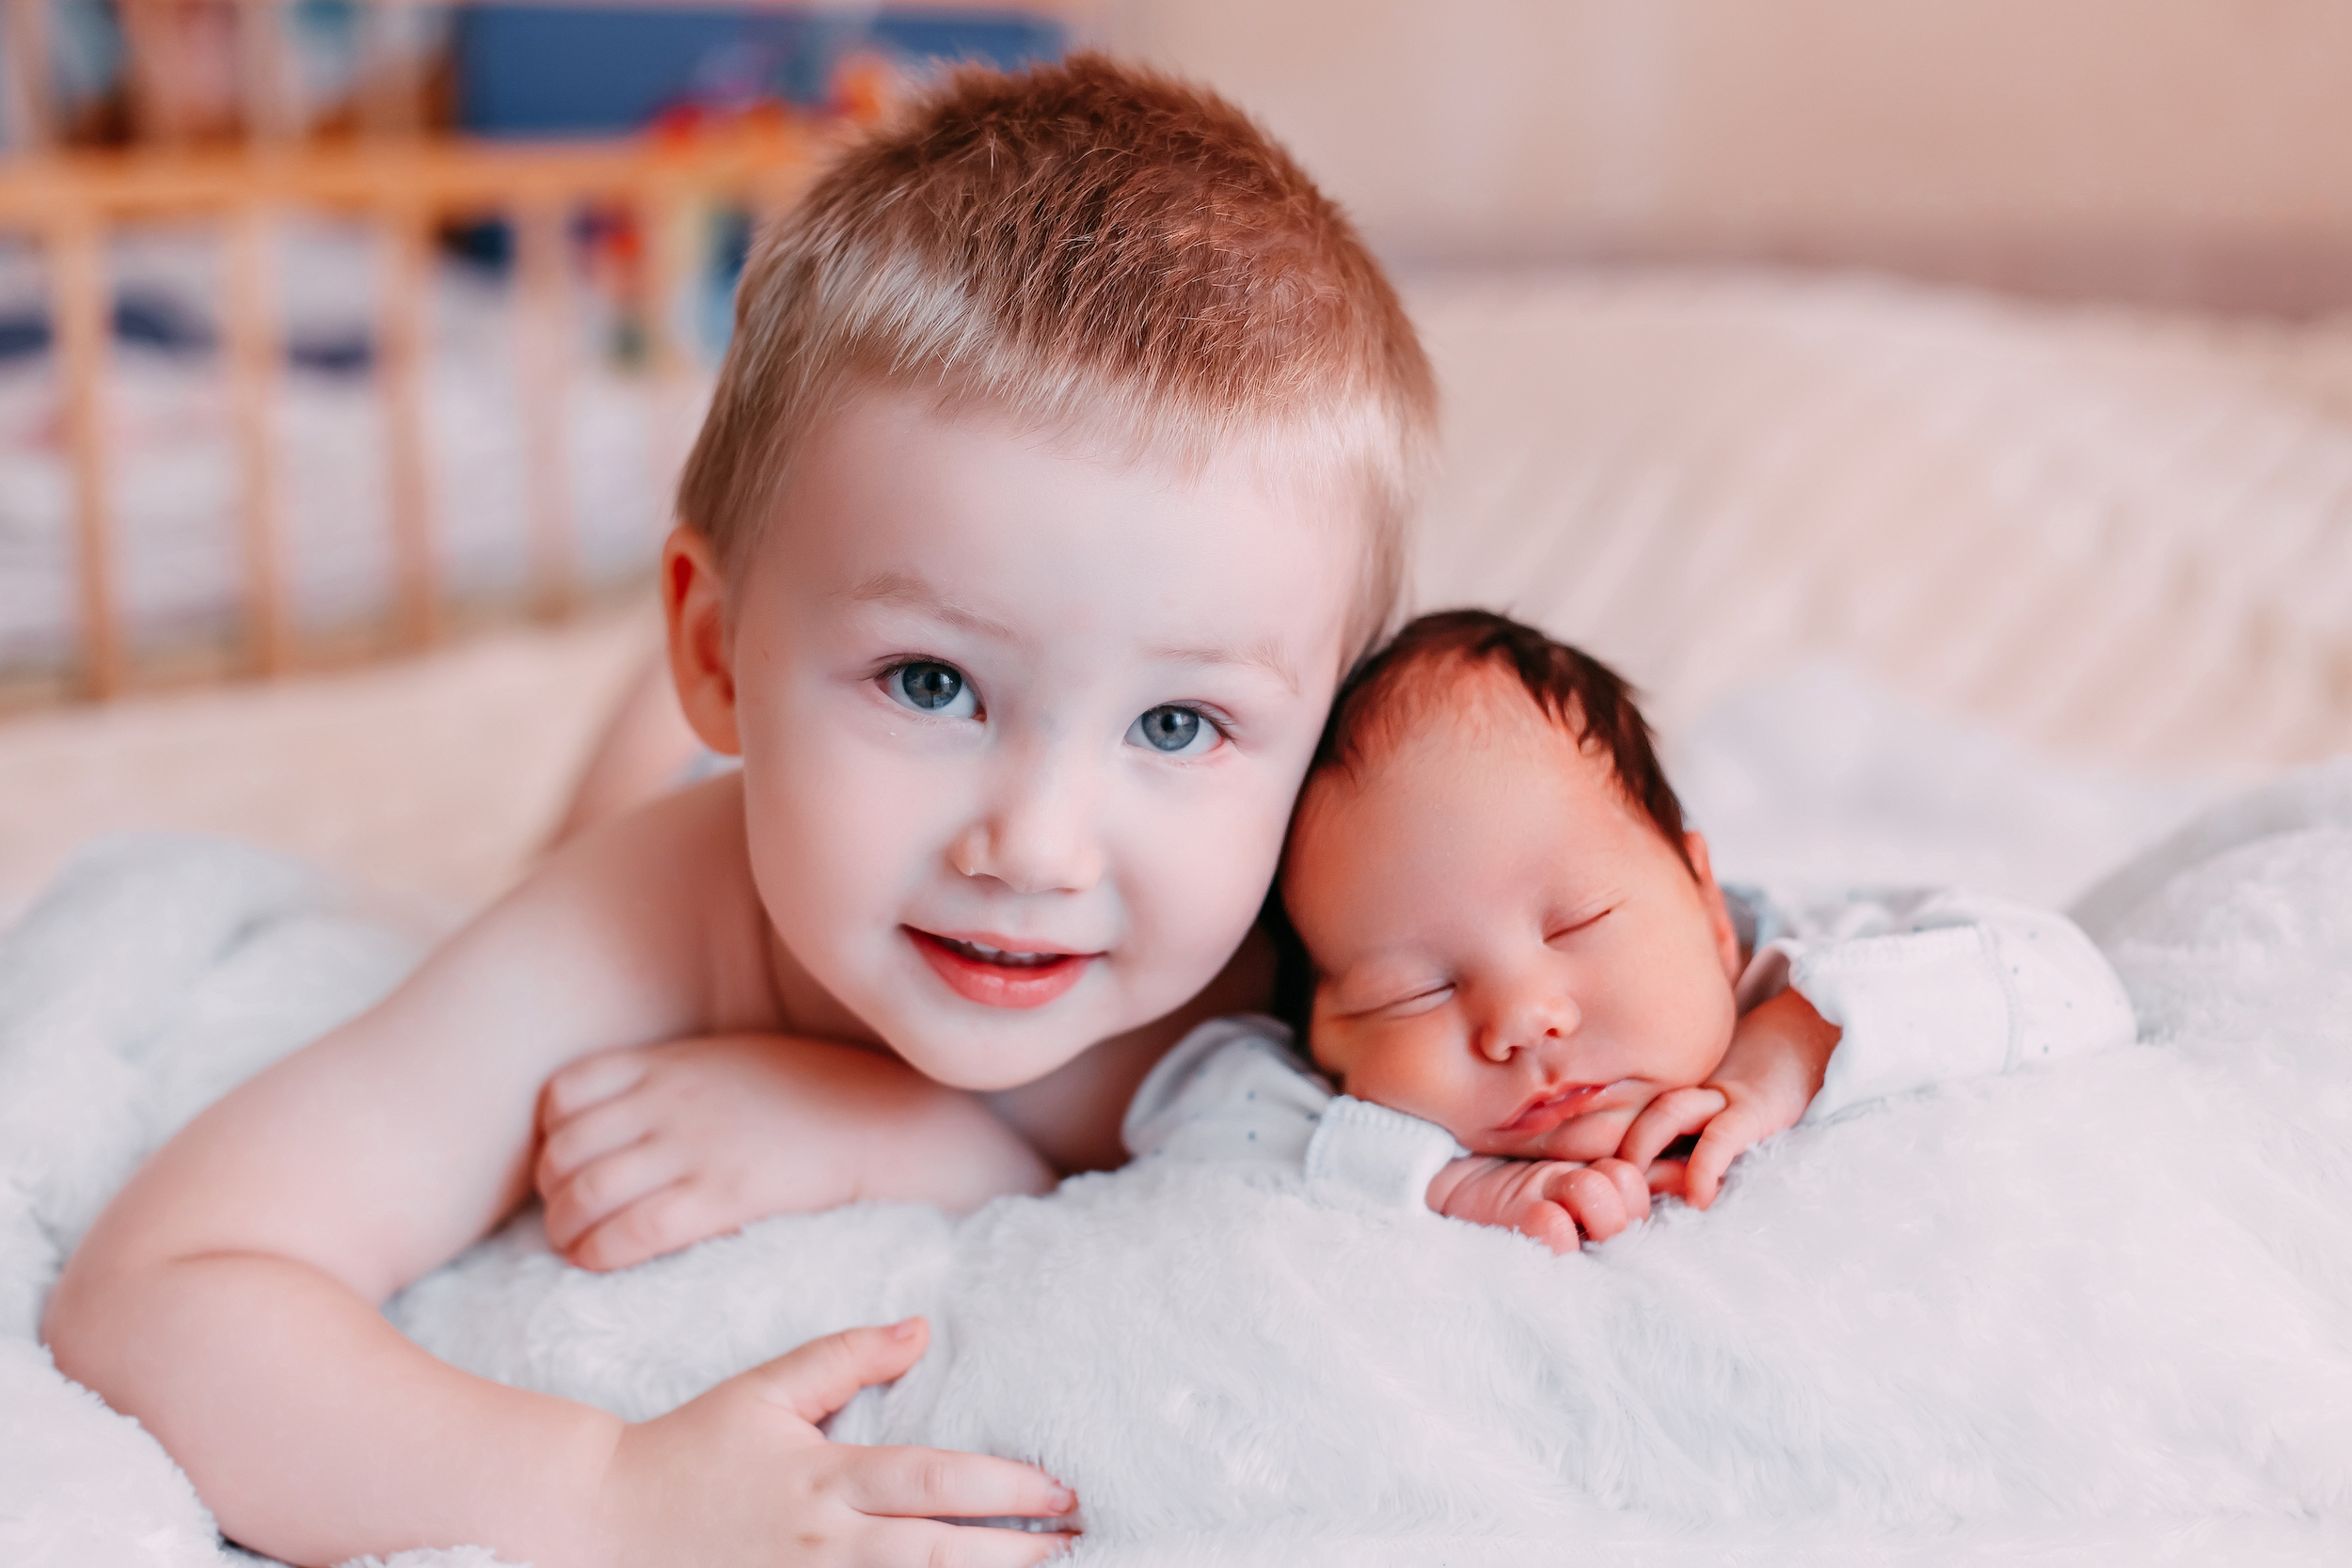 Young child and newborn.